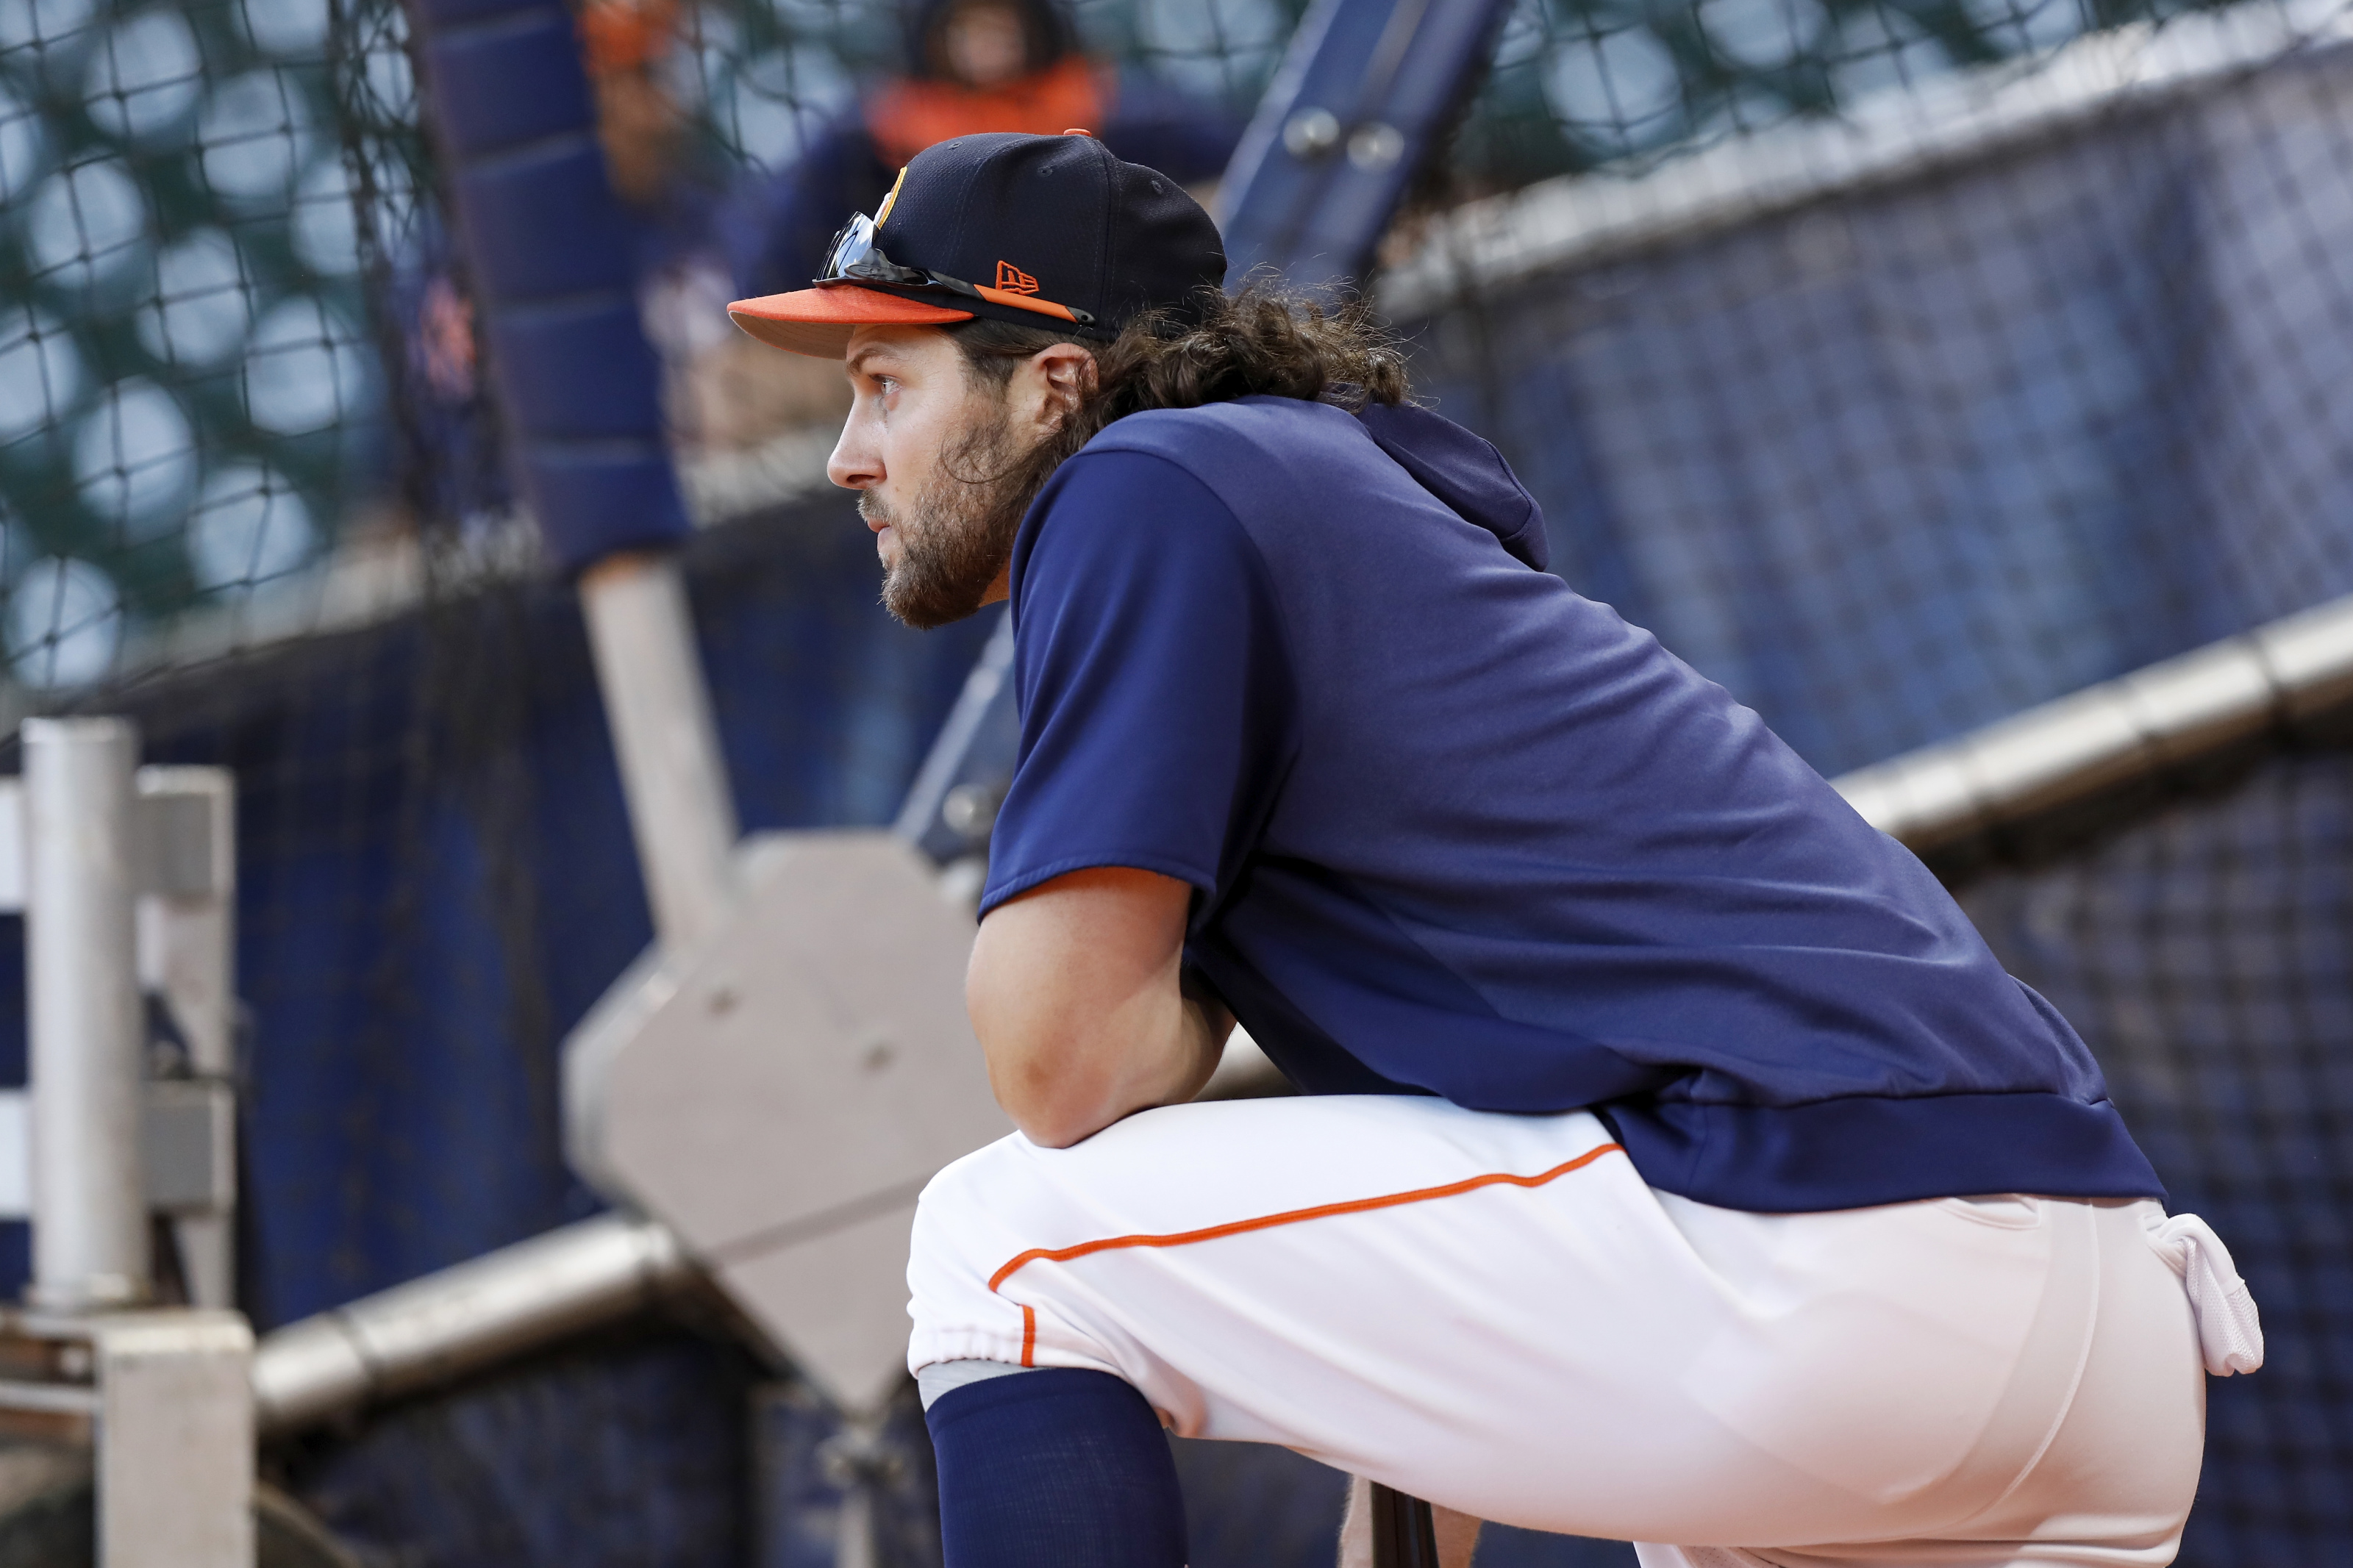 Jake Marisnick 'Open' To Dodgers' Questions About 2017 Astros